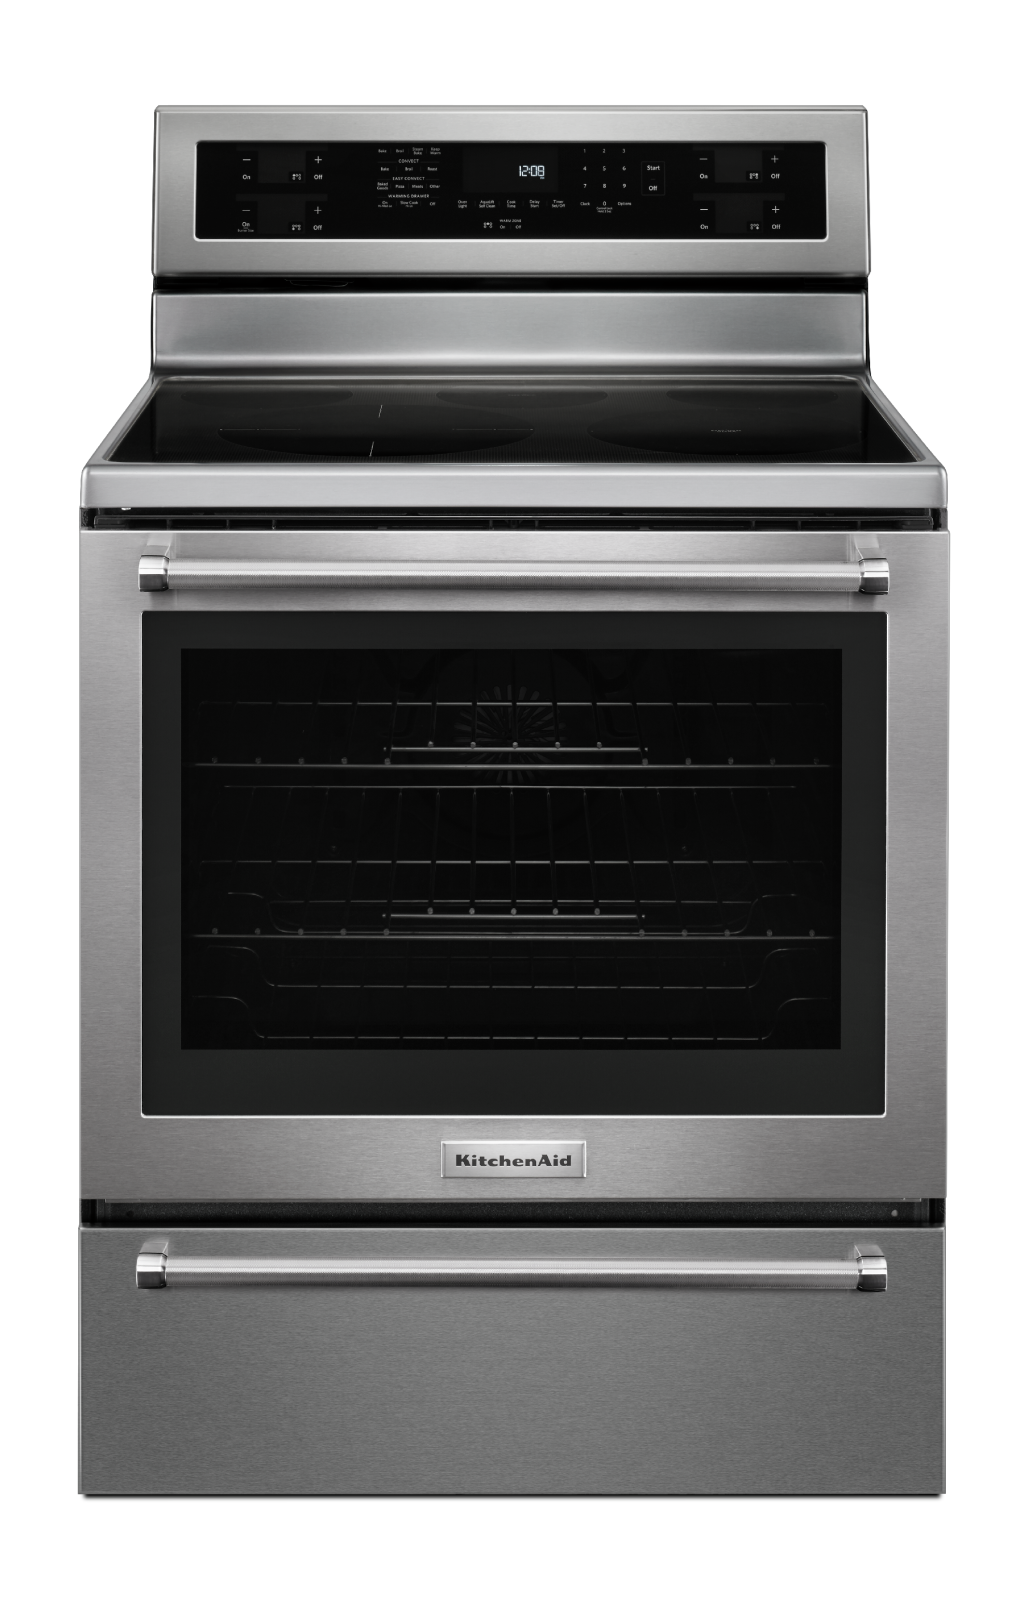 KitchenAid - 6.4 cu. ft  Electric Range in Stainless - YKFES530ESS